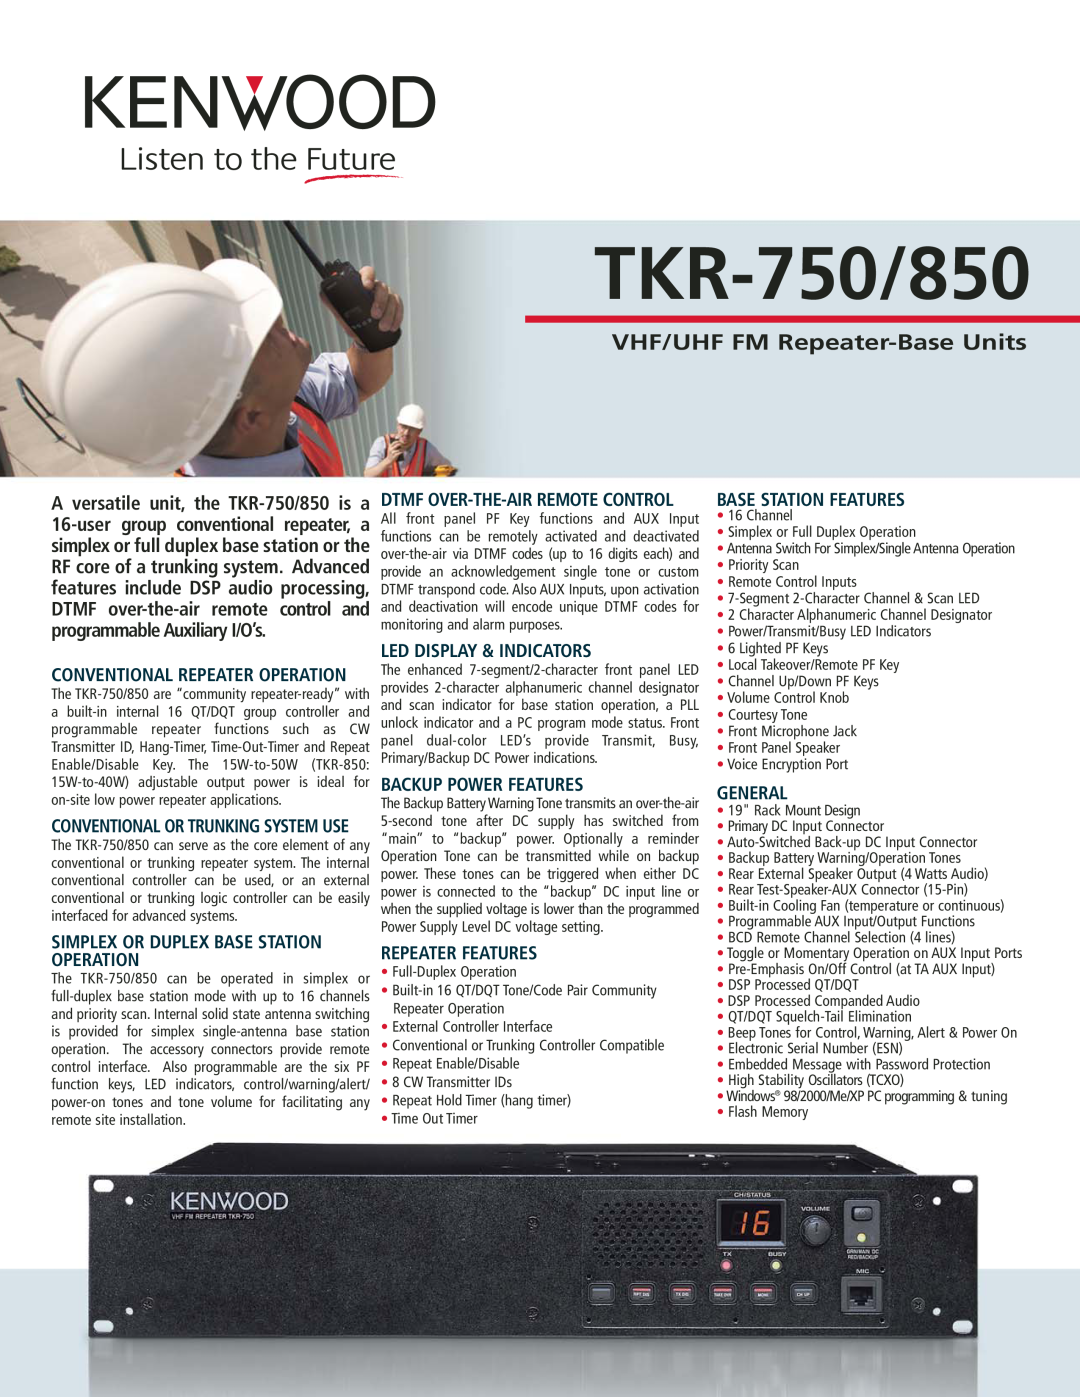 Kenwood manual TKR-750/850, VHF/UHF FM Repeater-Base Units, Simplex Or Duplex Base Station Operation, Repeater Features 